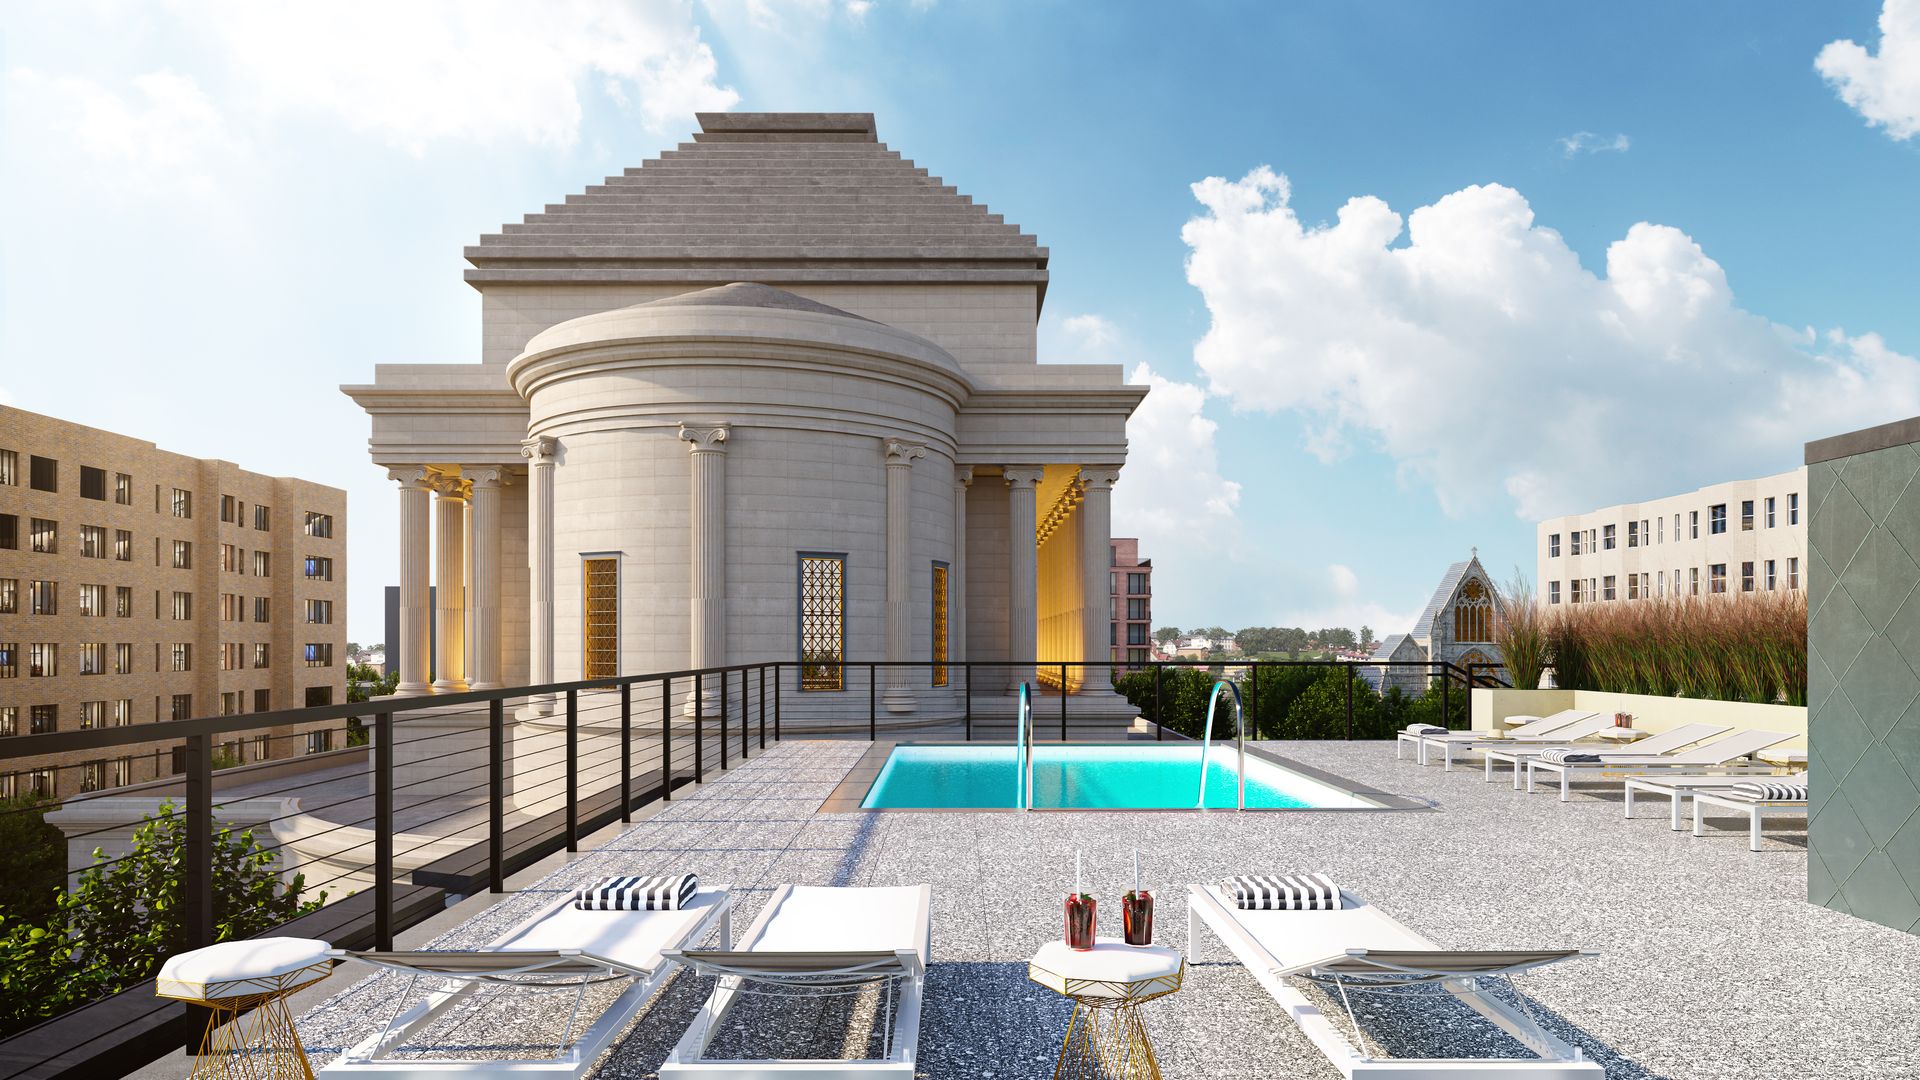 The rooftop with a view of the Scottish Rite Masonic Temple, with a pool and lounge chairs.